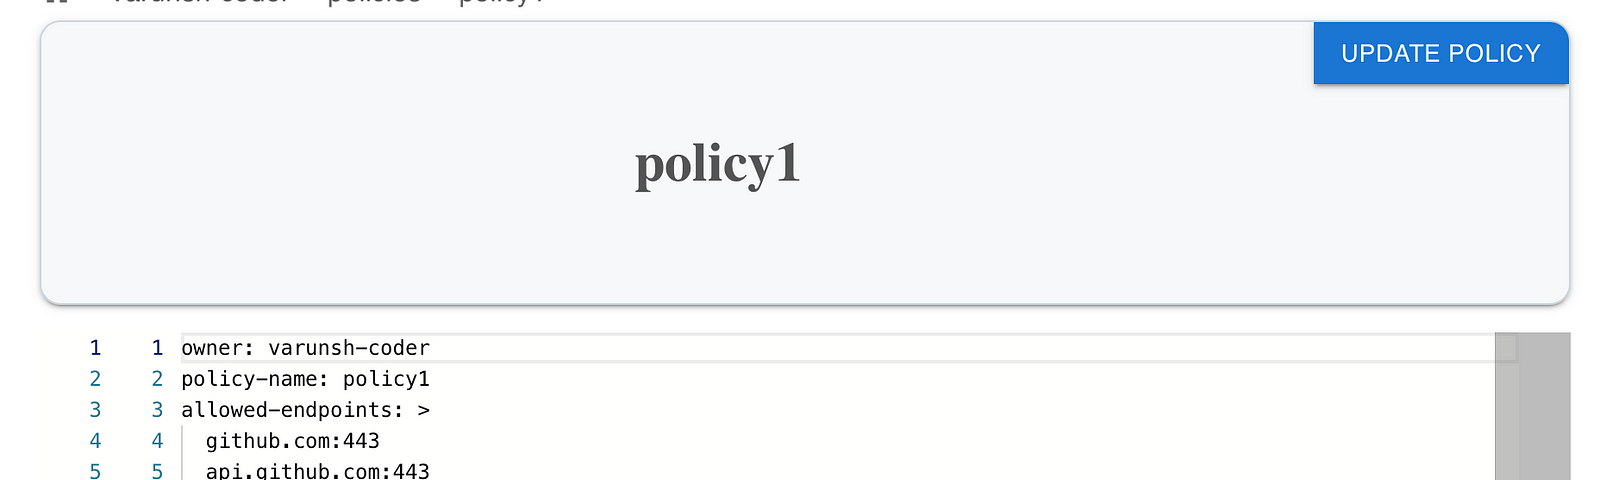 You can set the policy using the website